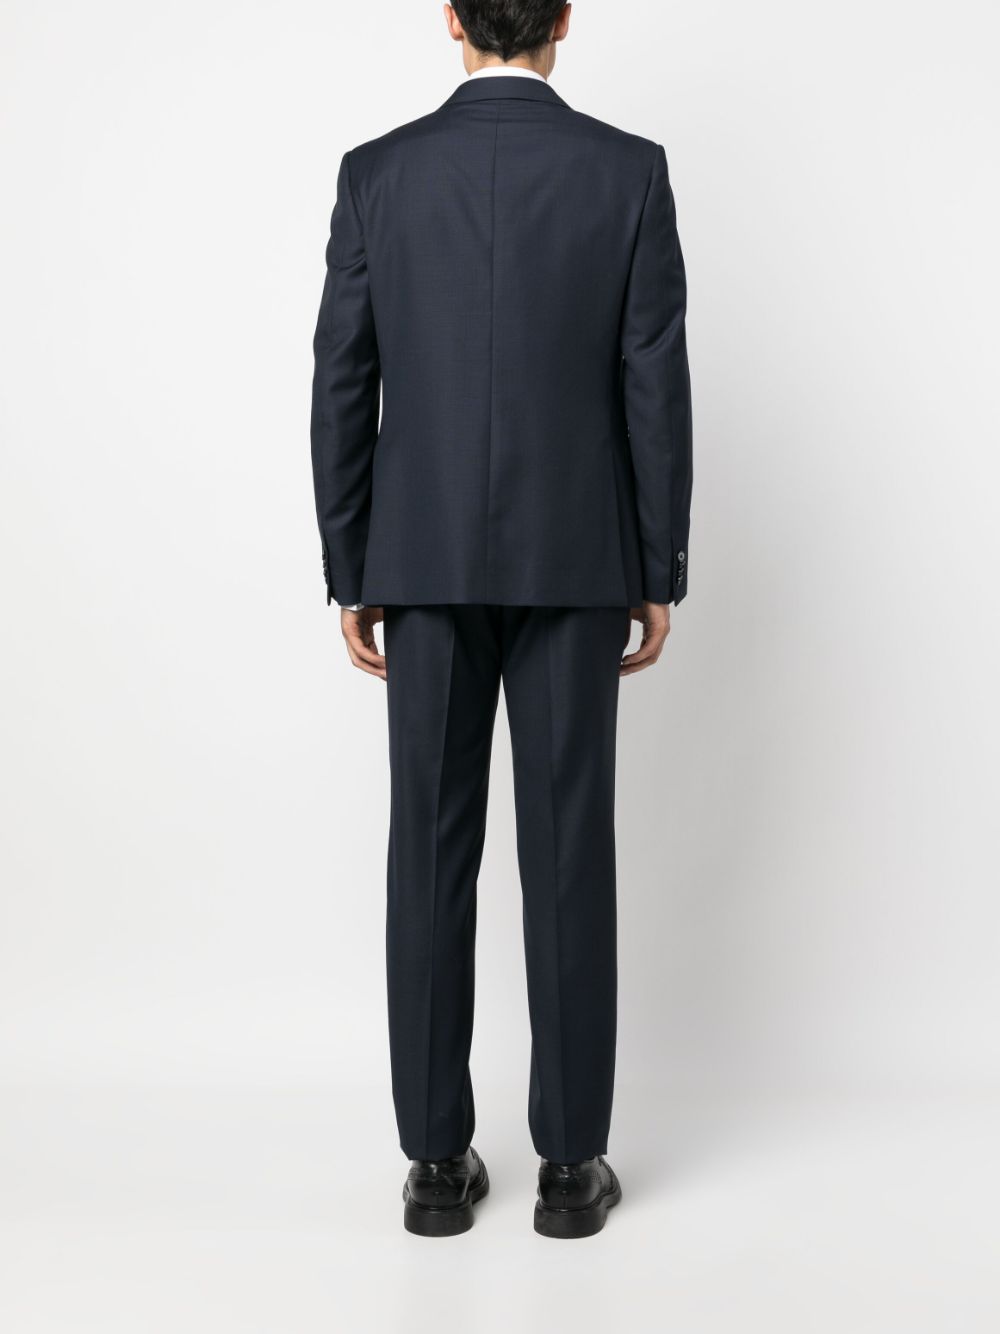 Zegna single-breasted Suit - Farfetch